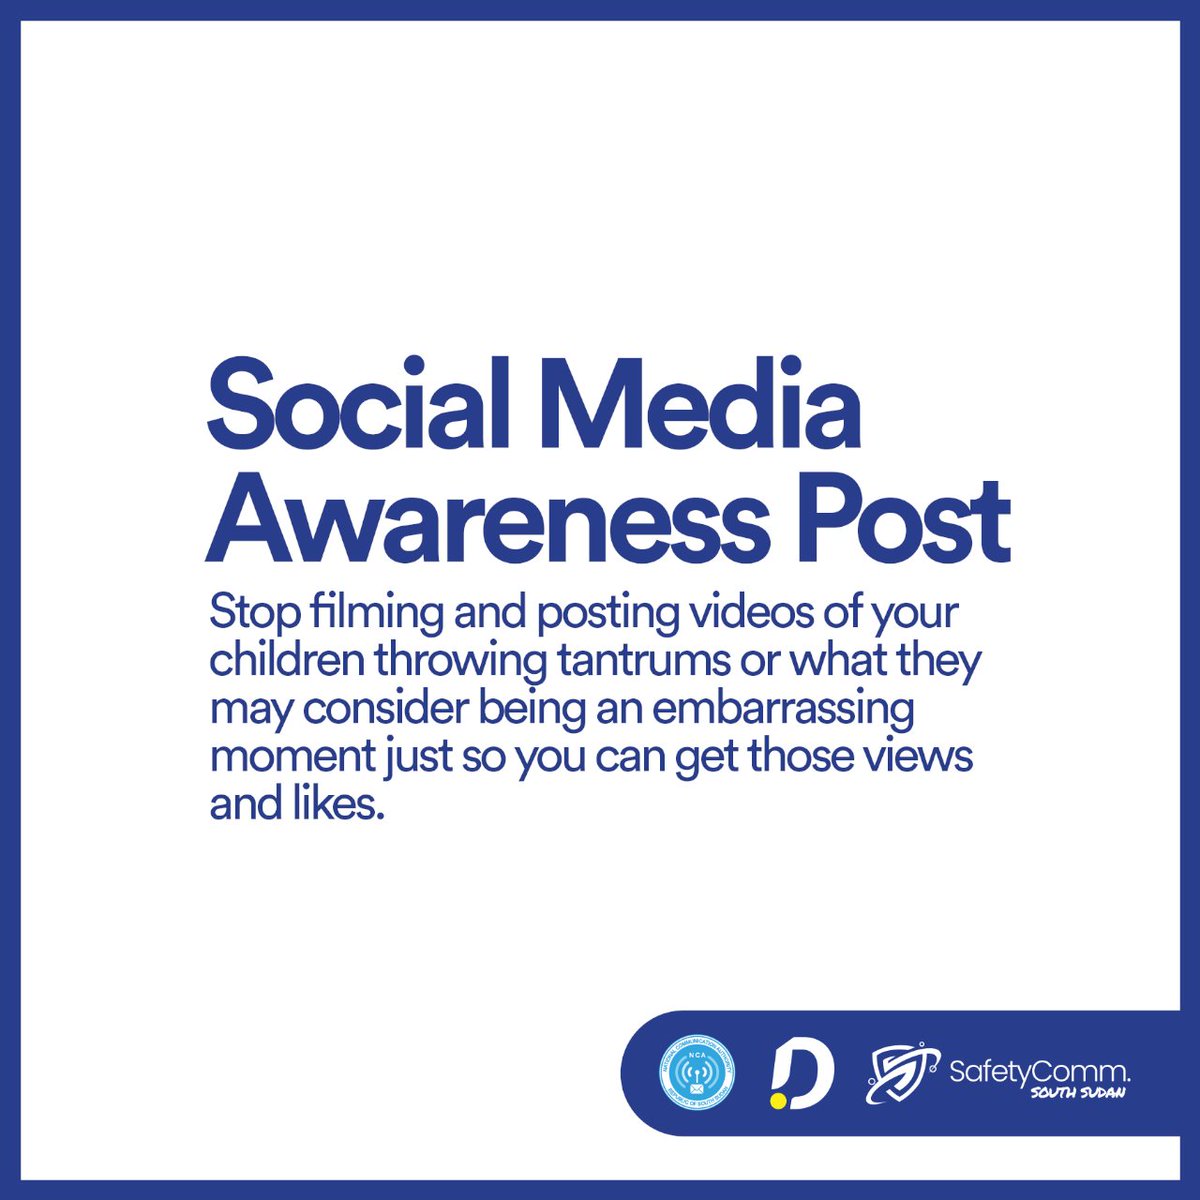 Social media has the world forgetting what really matters!
Just like you wouldn’t like humiliation, your children wouldn’t too. Be respectful of them.

Contact Us: +211 920 050 106
Email: Info@safetycomm.org

#SafetyComm #Defyhatenow #Socialmediaawareness